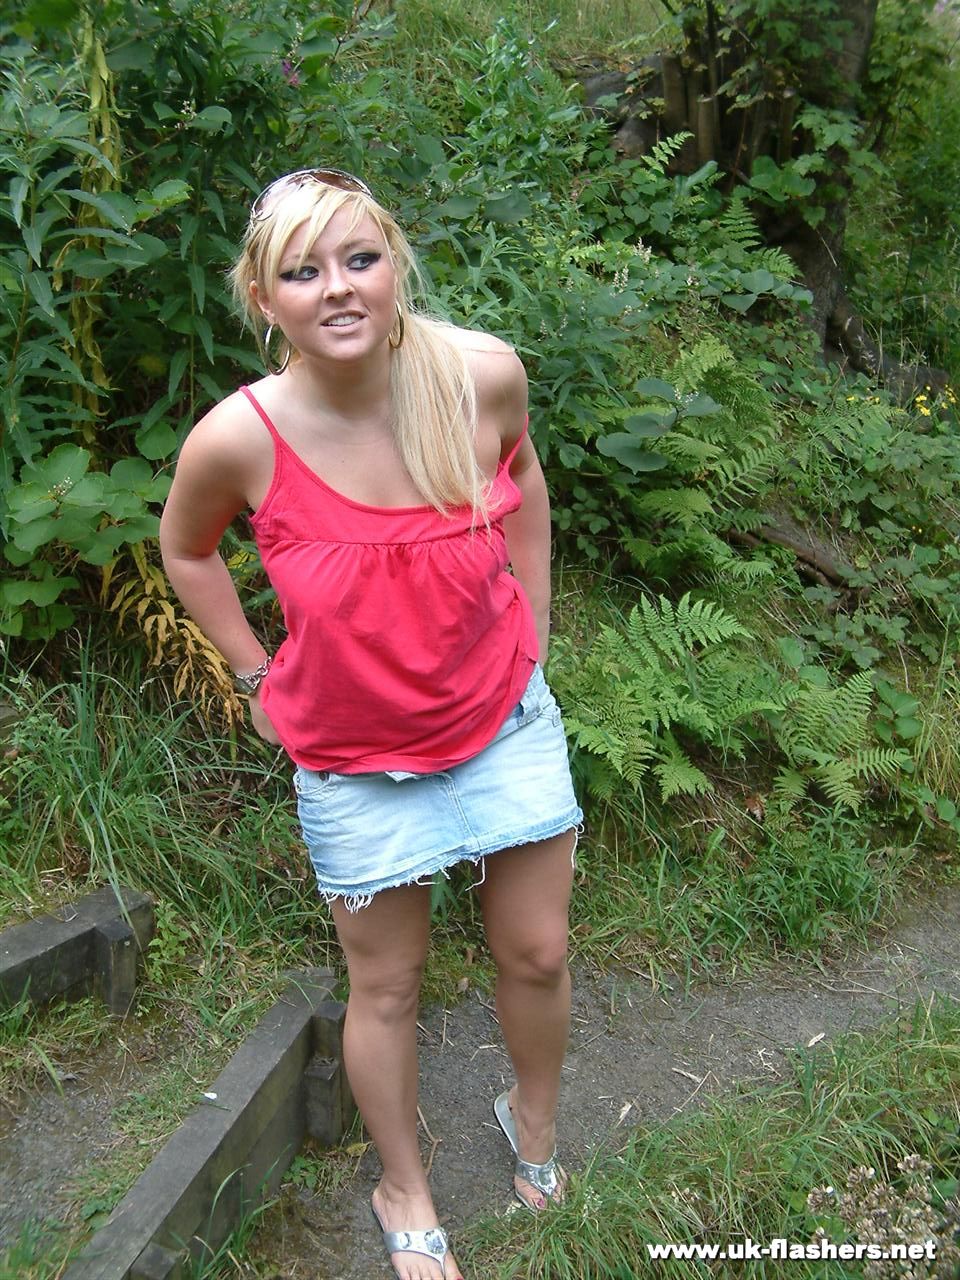 Overweight UK female with blonde hair strips naked on a popular walking trails porno fotoğrafı #428197328 | UK Flashers Pics, Lena Leigh, Public, mobil porno